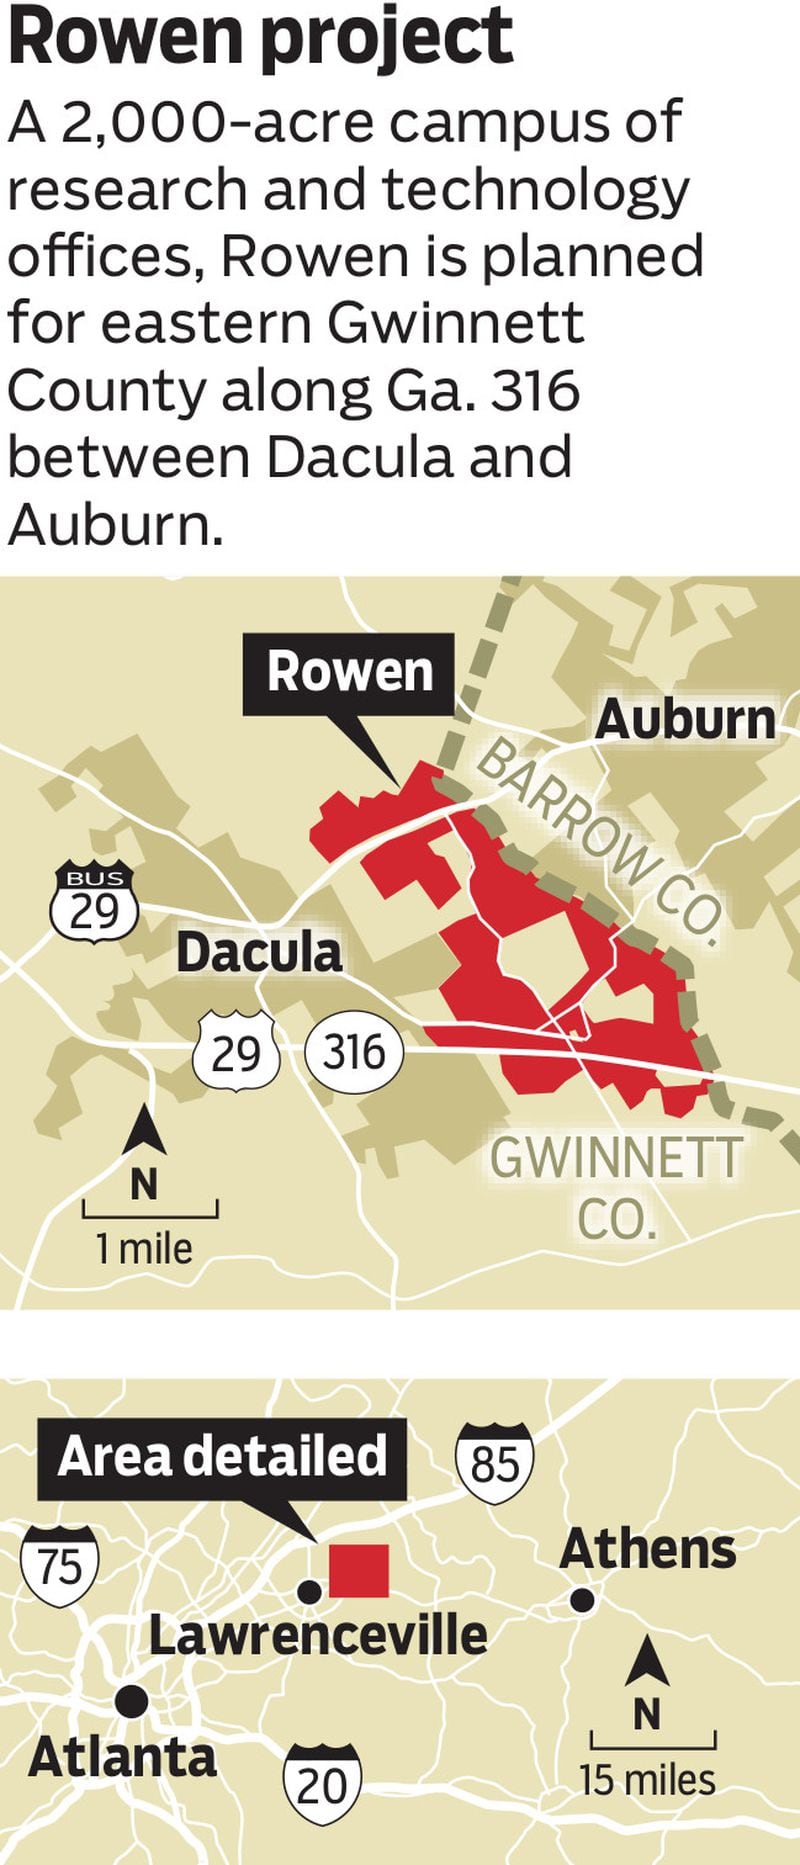 A 2,000-acre campus of research and technology offices, Rowen is planned for eastern Gwinnett County along Ga. 316 between Dacula and Auburn.